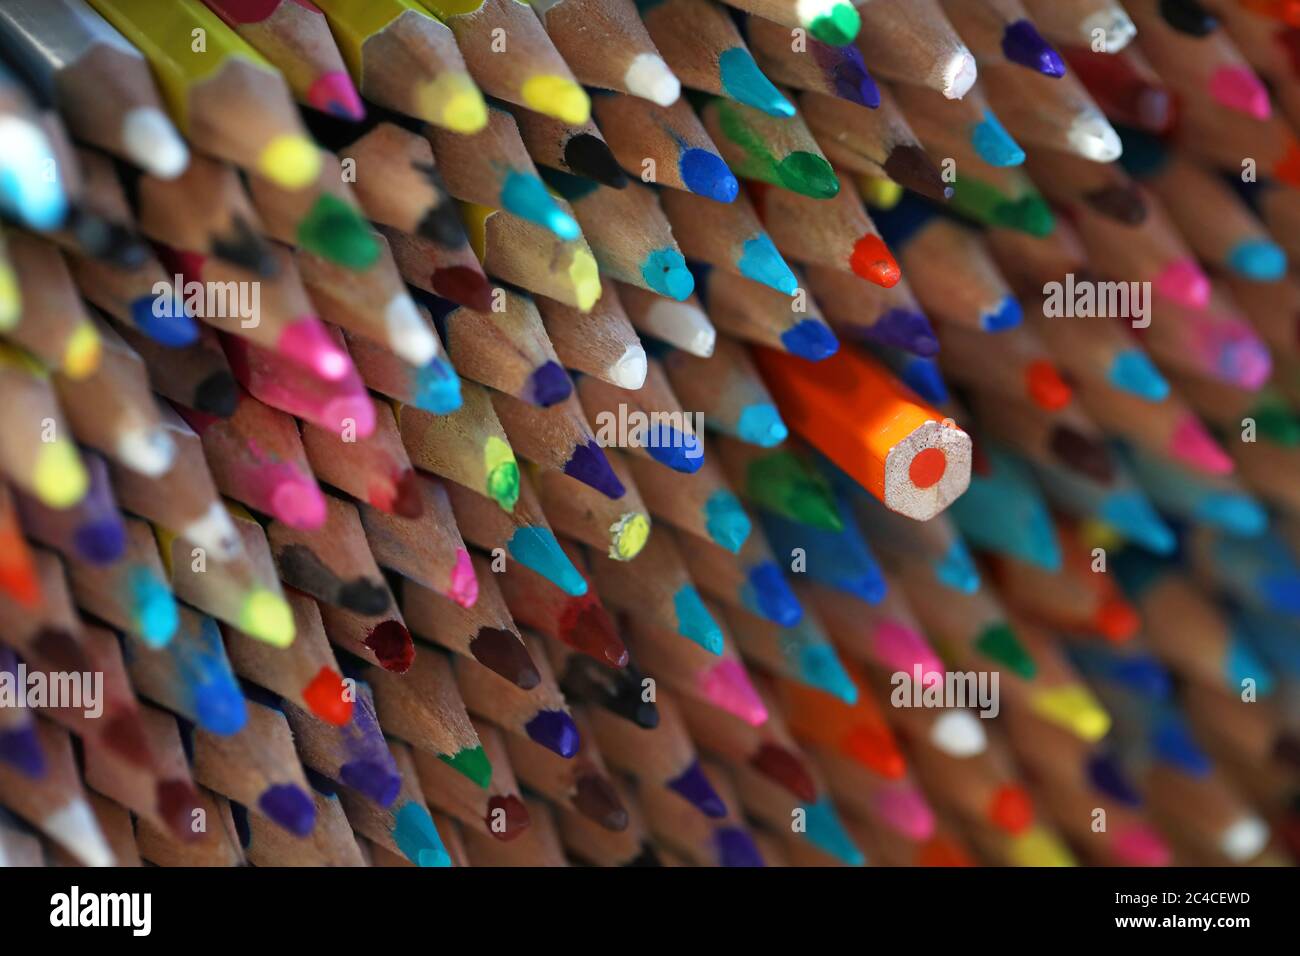 A large stack of masses of sharp multi colored pencils with one turned around facing the wrong way. Not fitting in, different, alternative, standing o Stock Photo